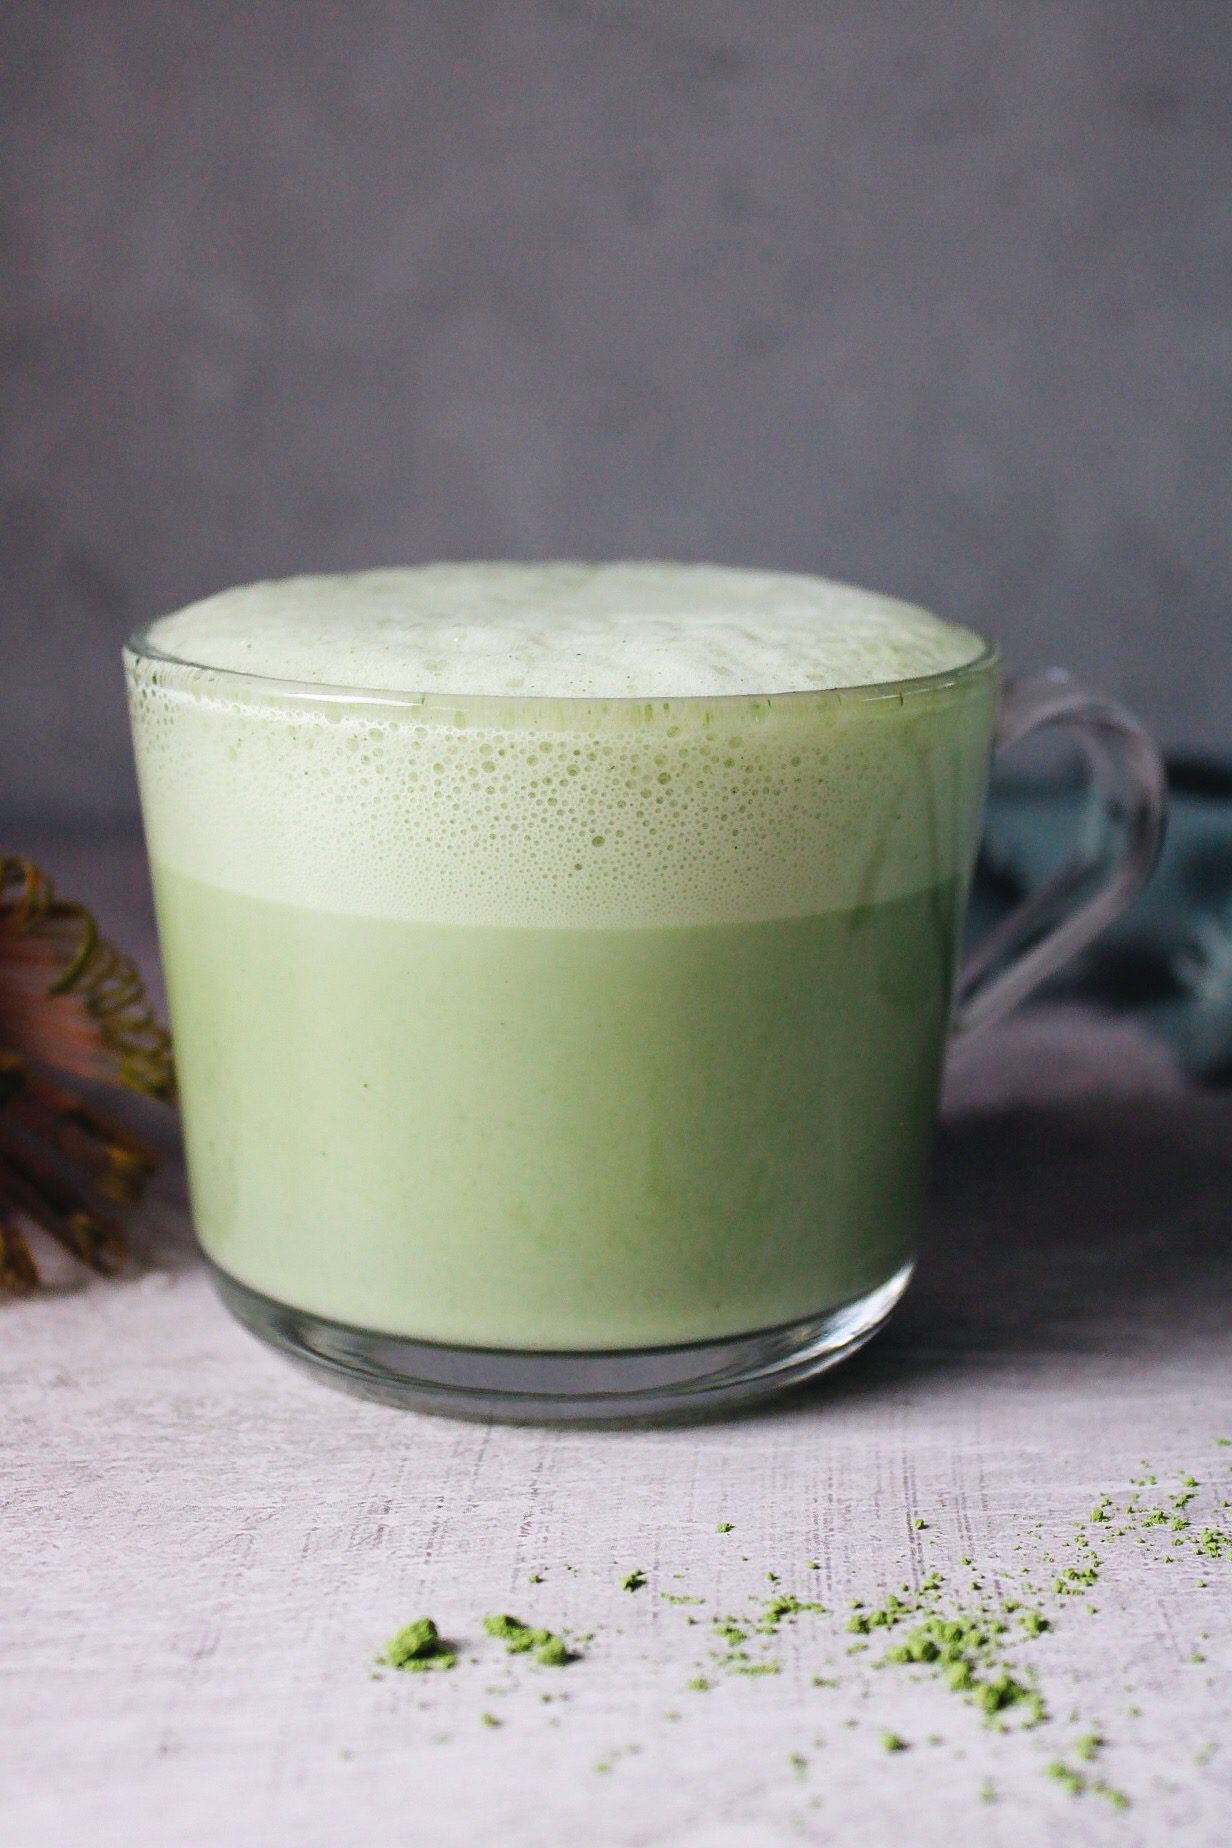 How To Make Matcha Green Tea - The Cup of Life